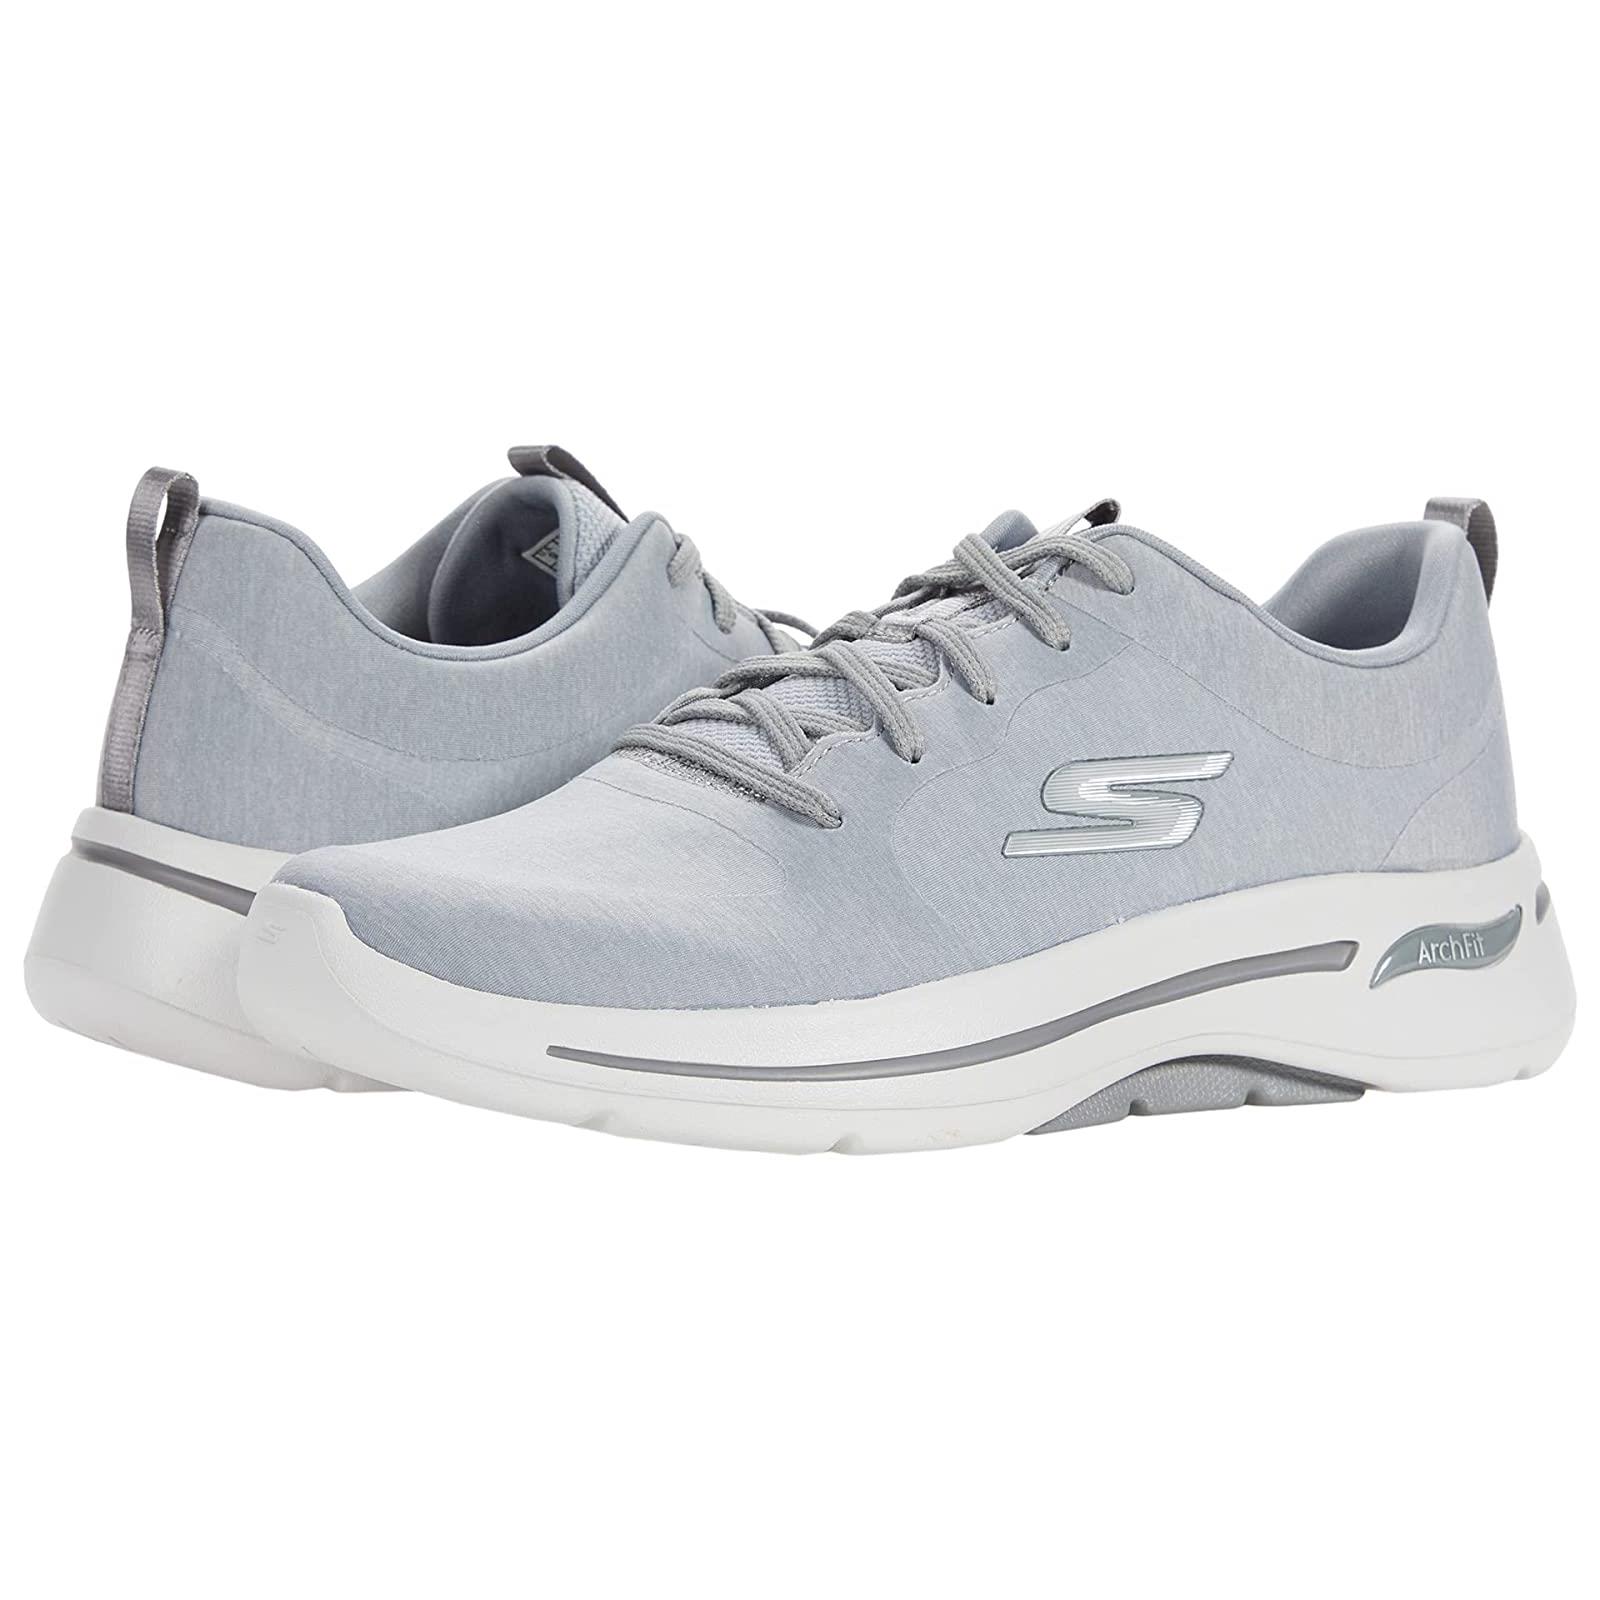 Woman`s Shoes Skechers Performance Go Walk Arch Fit Moon Shadows Gray